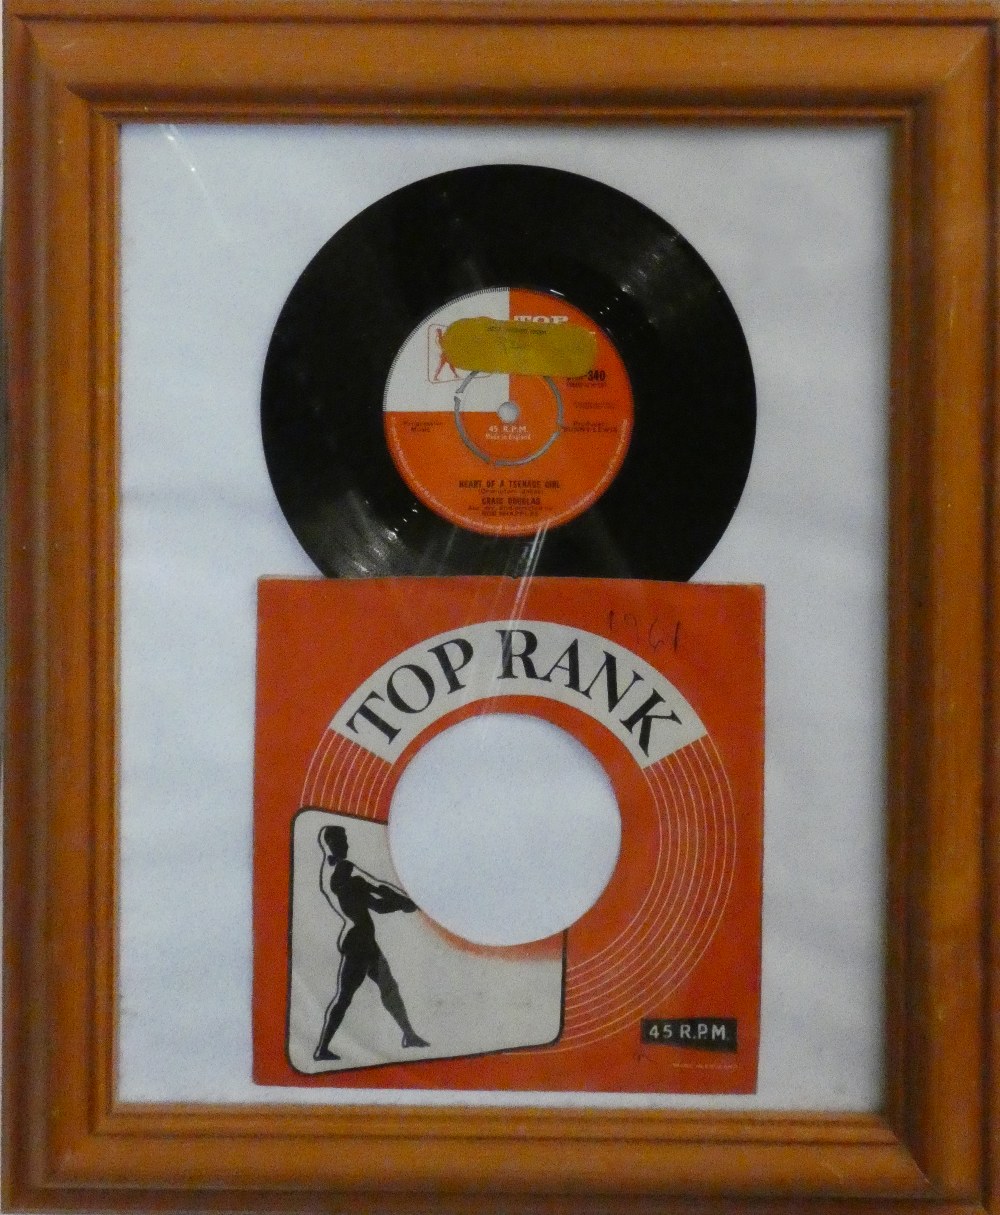 A signed and framed 45RPM record by Craig Douglas, featuring 'Heart of a Teenage Girl', together - Image 3 of 3